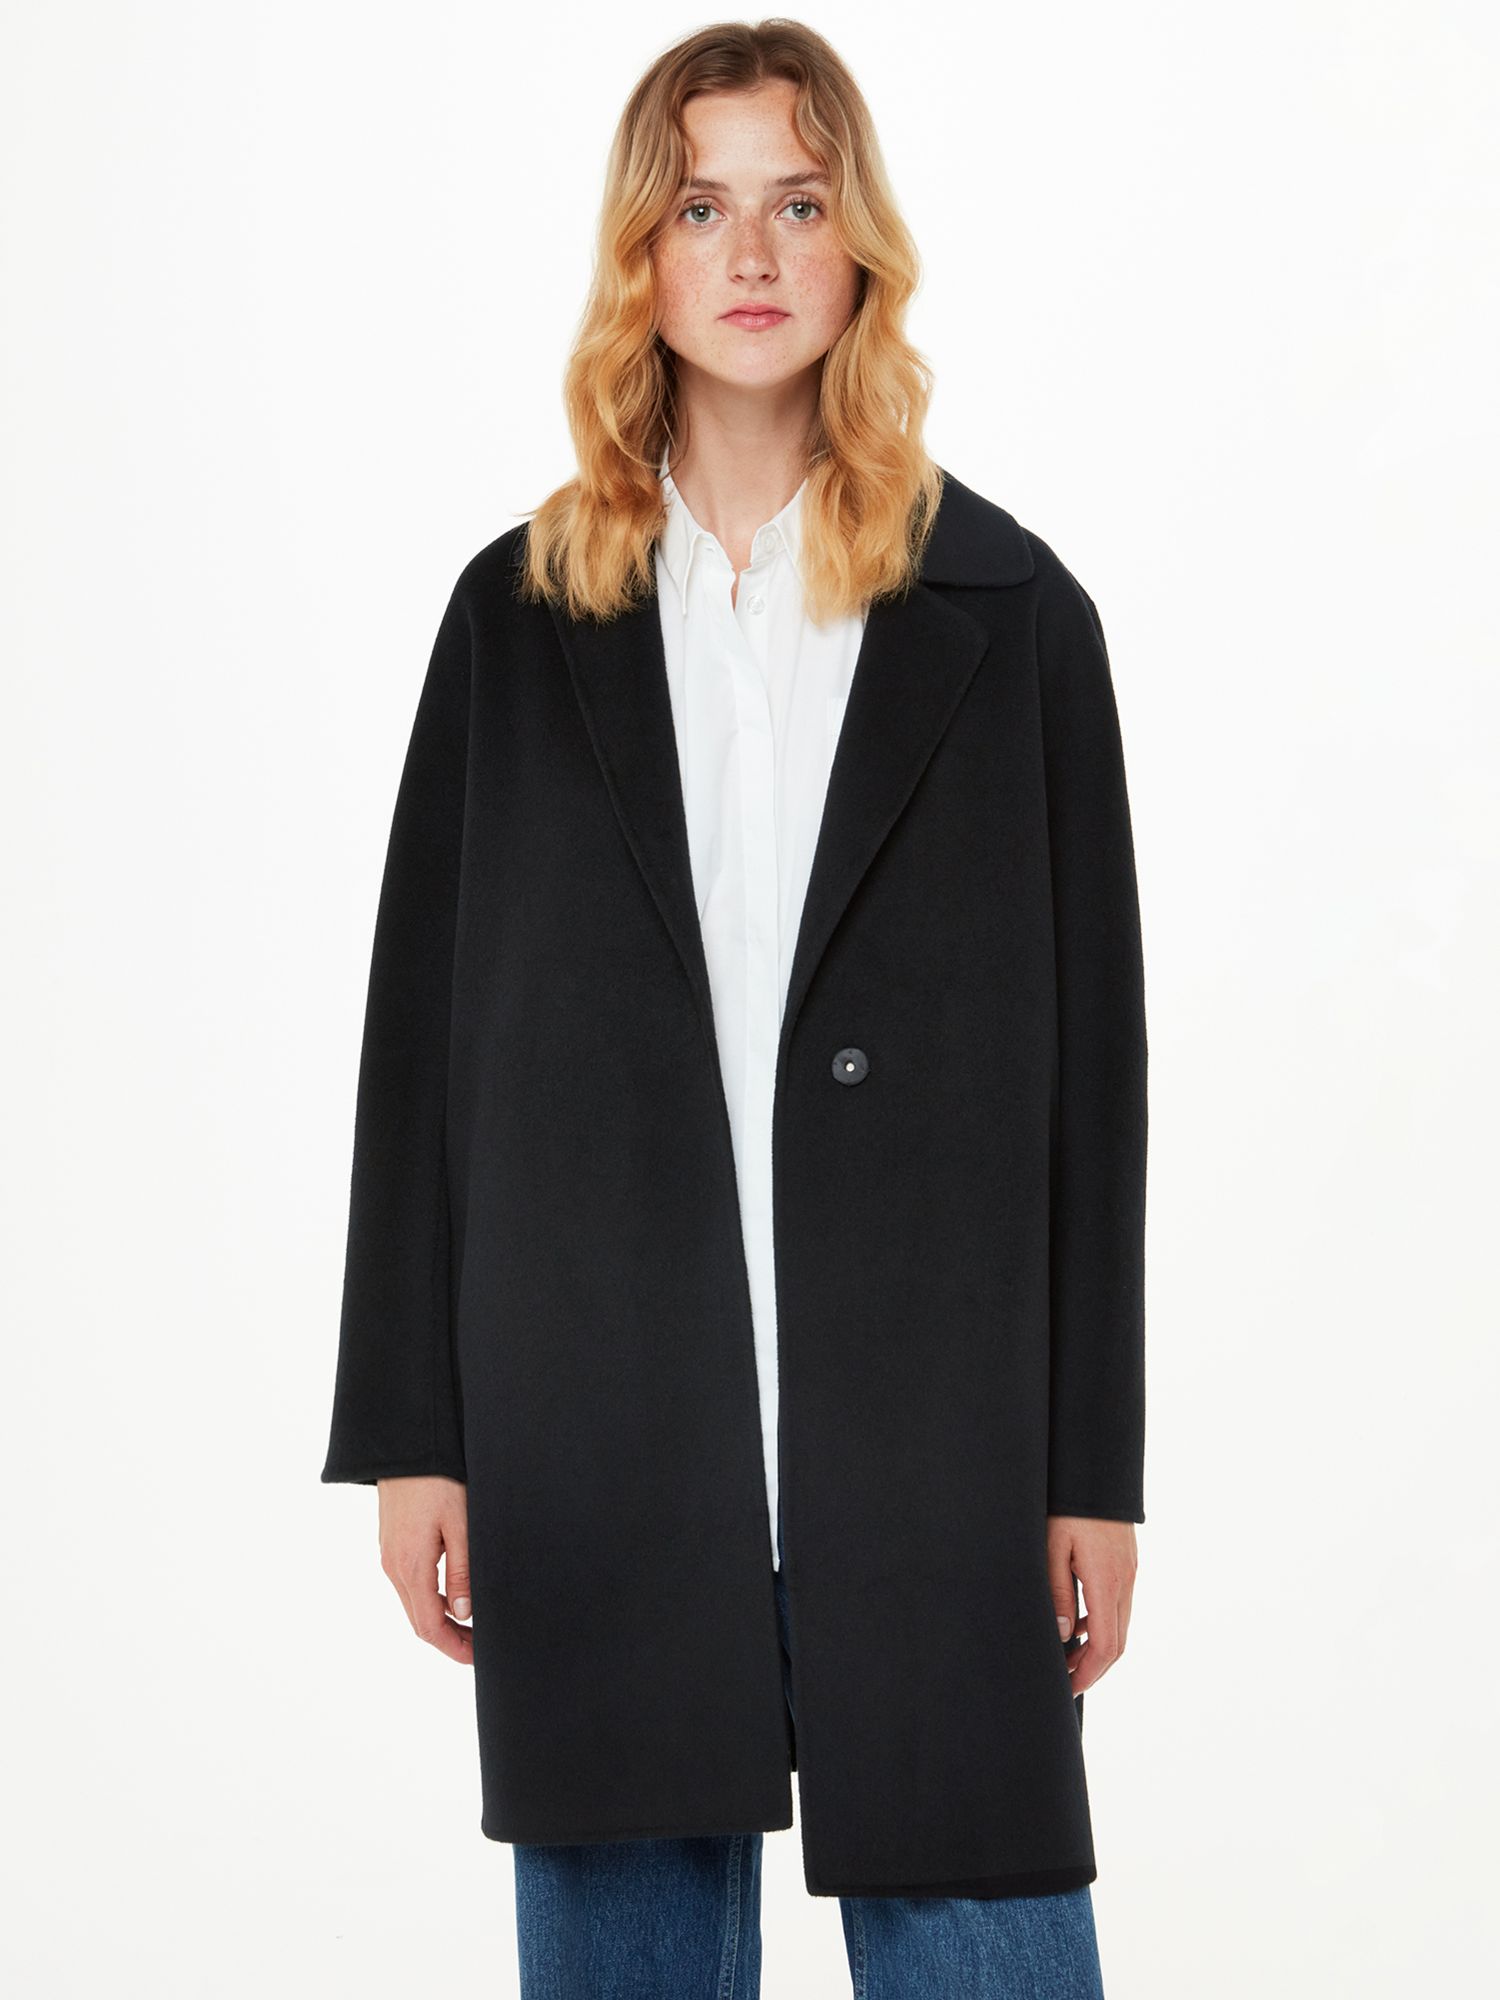 Whistles Double Faced Wool Blend Coat, Black at John Lewis & Partners